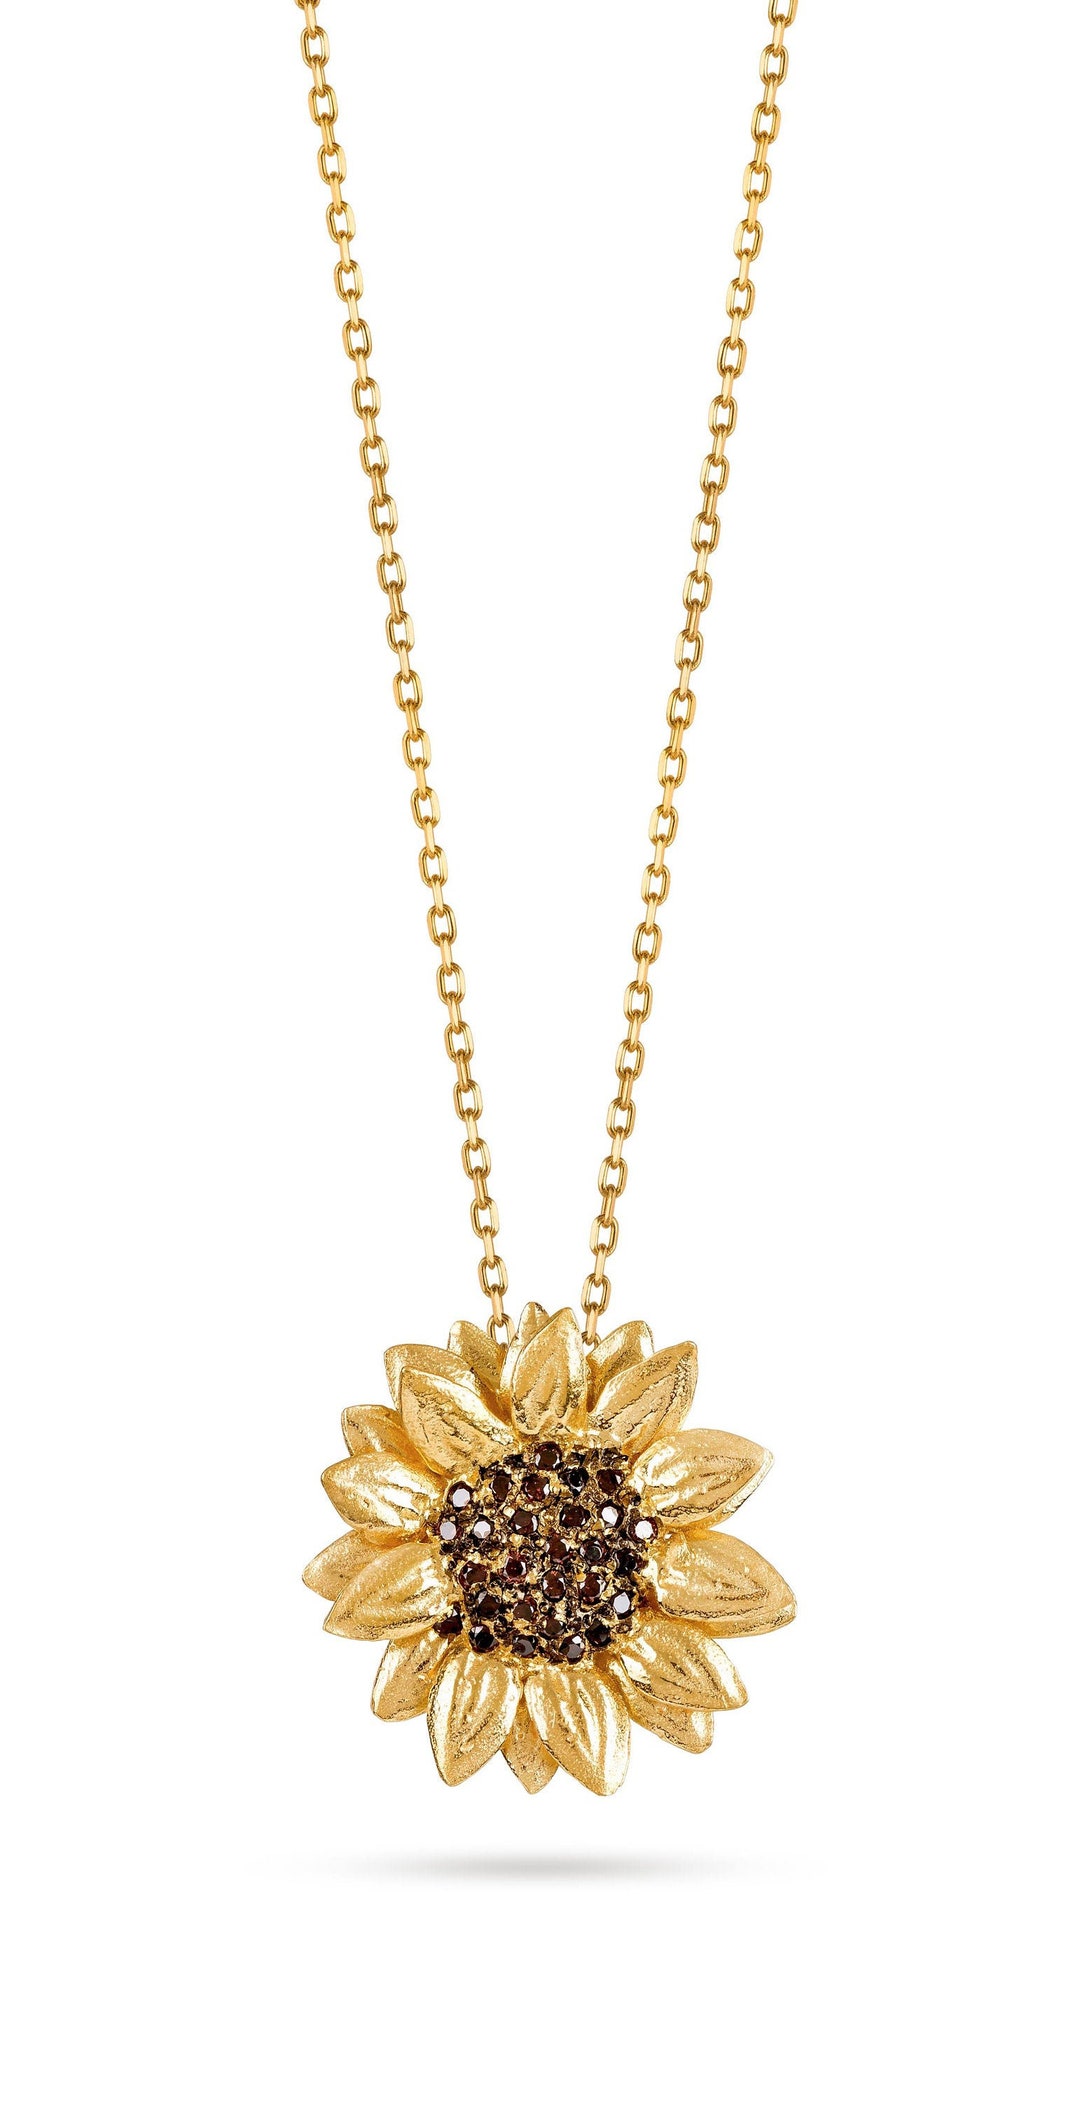 Sunflower Necklace Gold Plated Sterling Silver Golden - Etsy